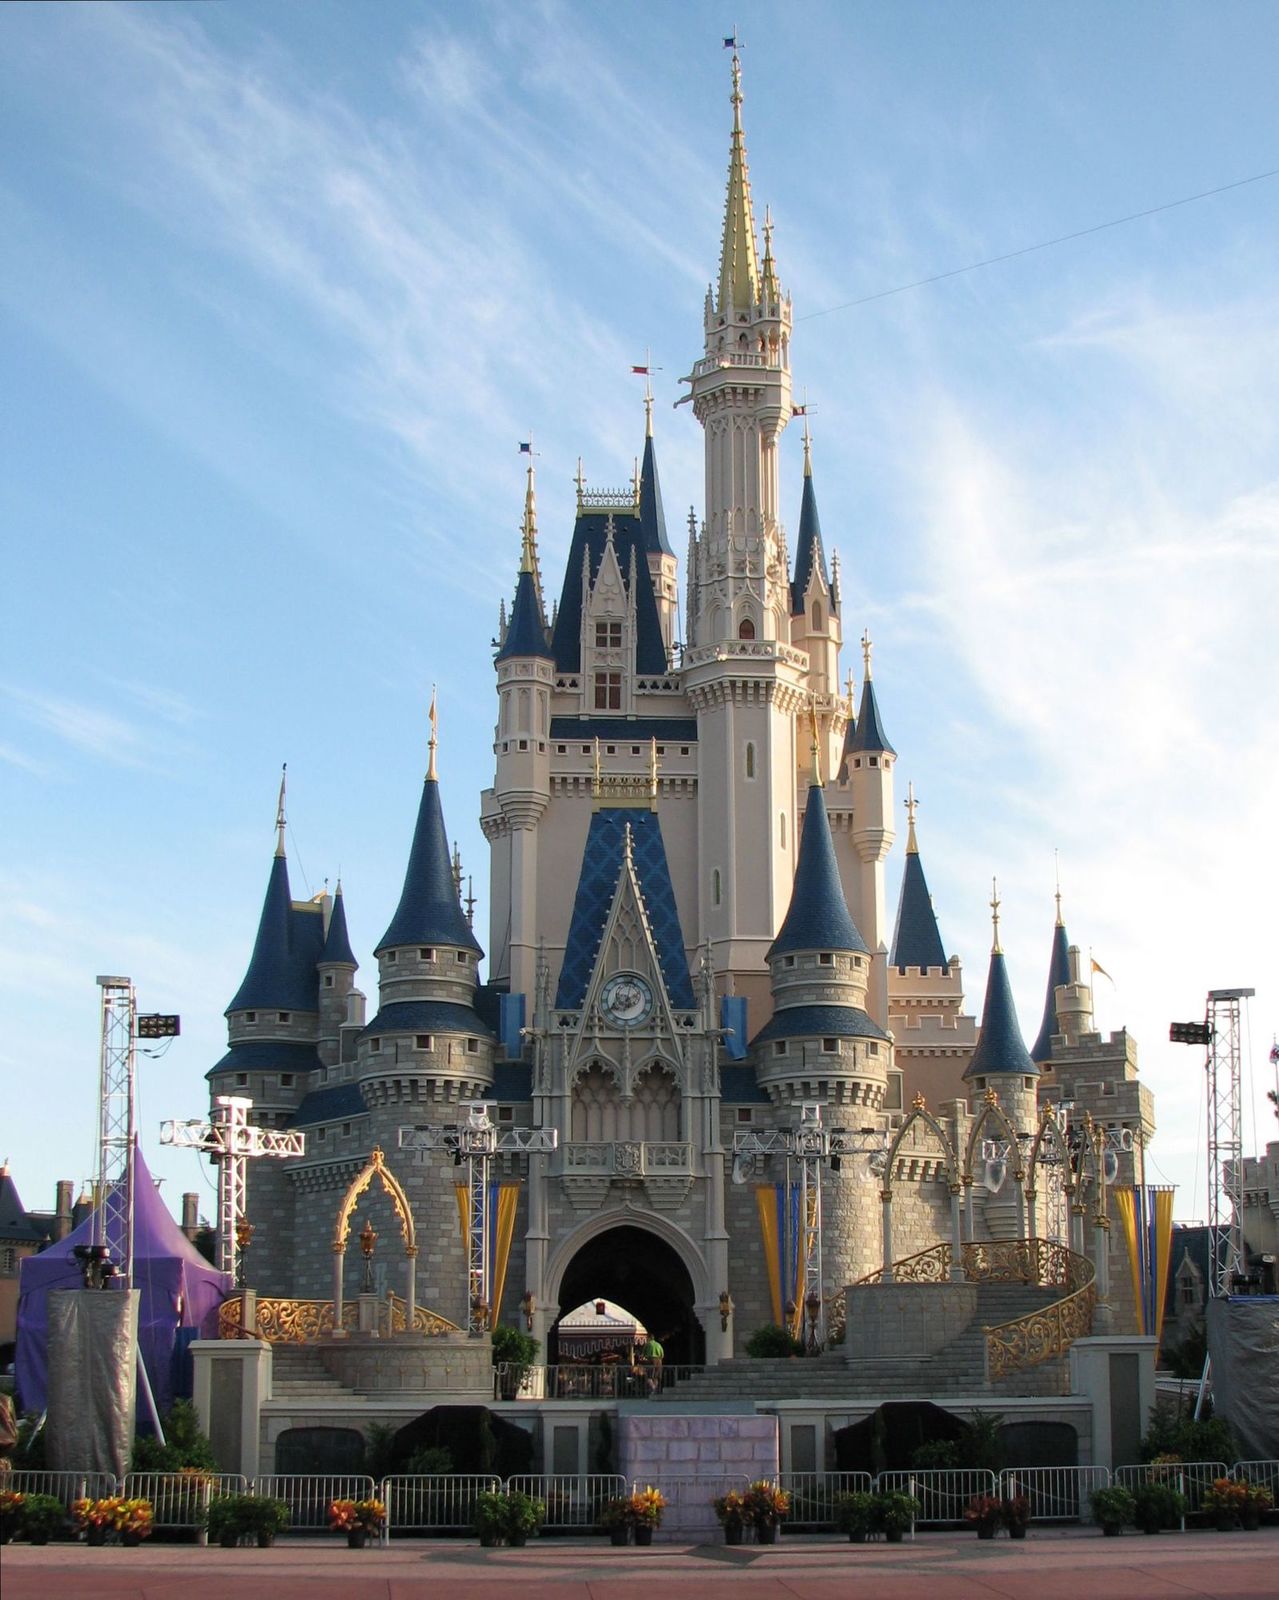 nown-as-Walt-Disney-World-or-simply-Disney-World-is-an-entertainment-complex-in-Bay-Lake-Florida.jpg